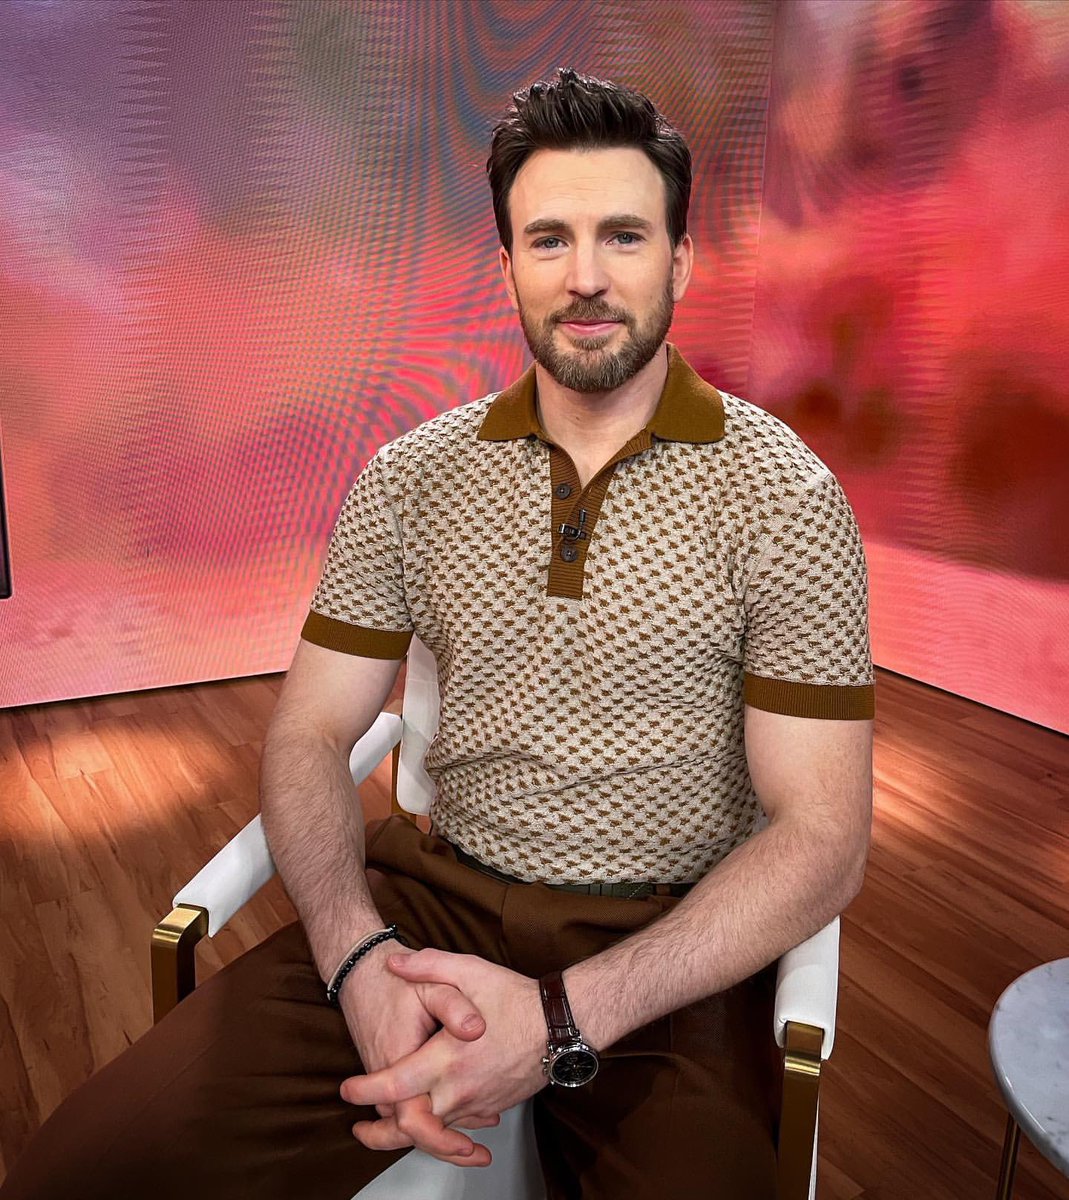 #goodmorningamerica on IG
“Chris Evans is here in Times Square to talk about his new movie, #Ghosted! 👏”